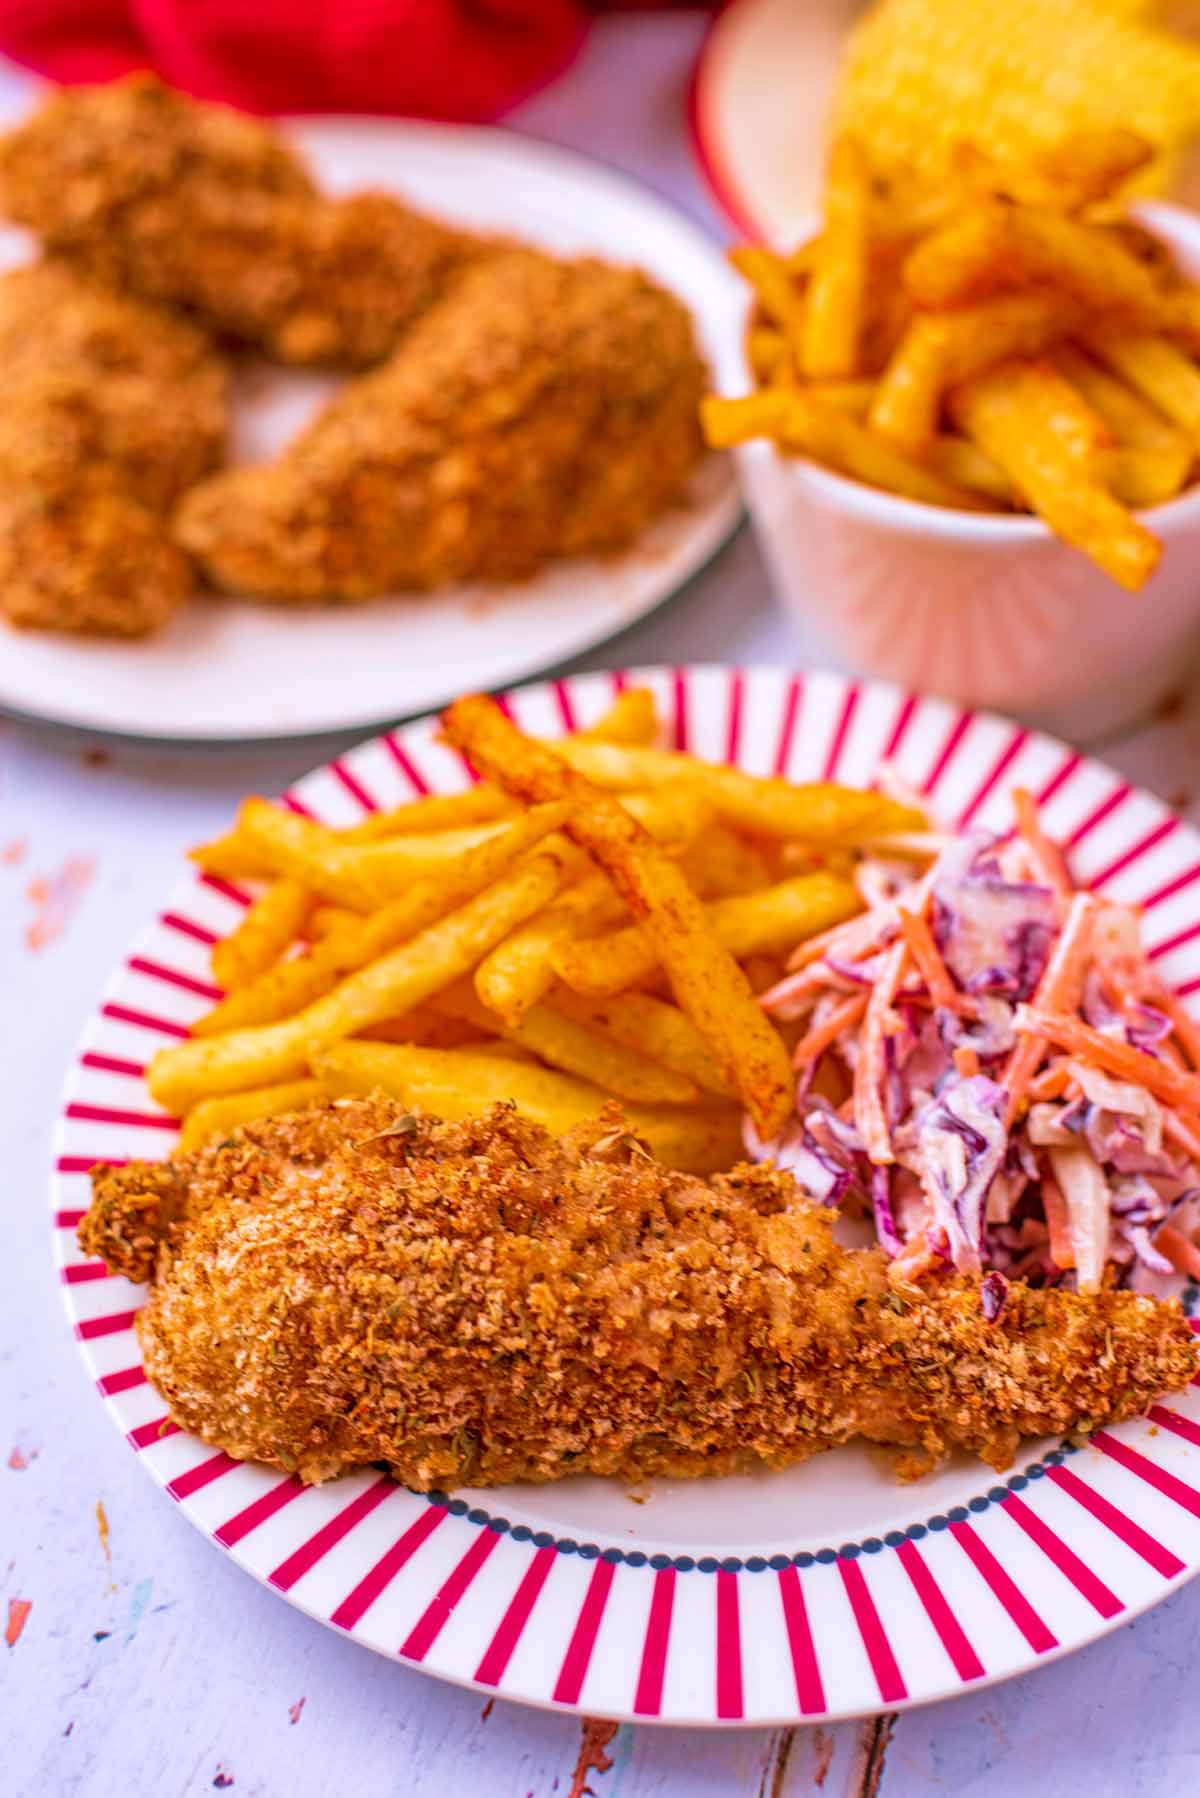 Healthy KFC on a red and white plate. French fries are in the background.